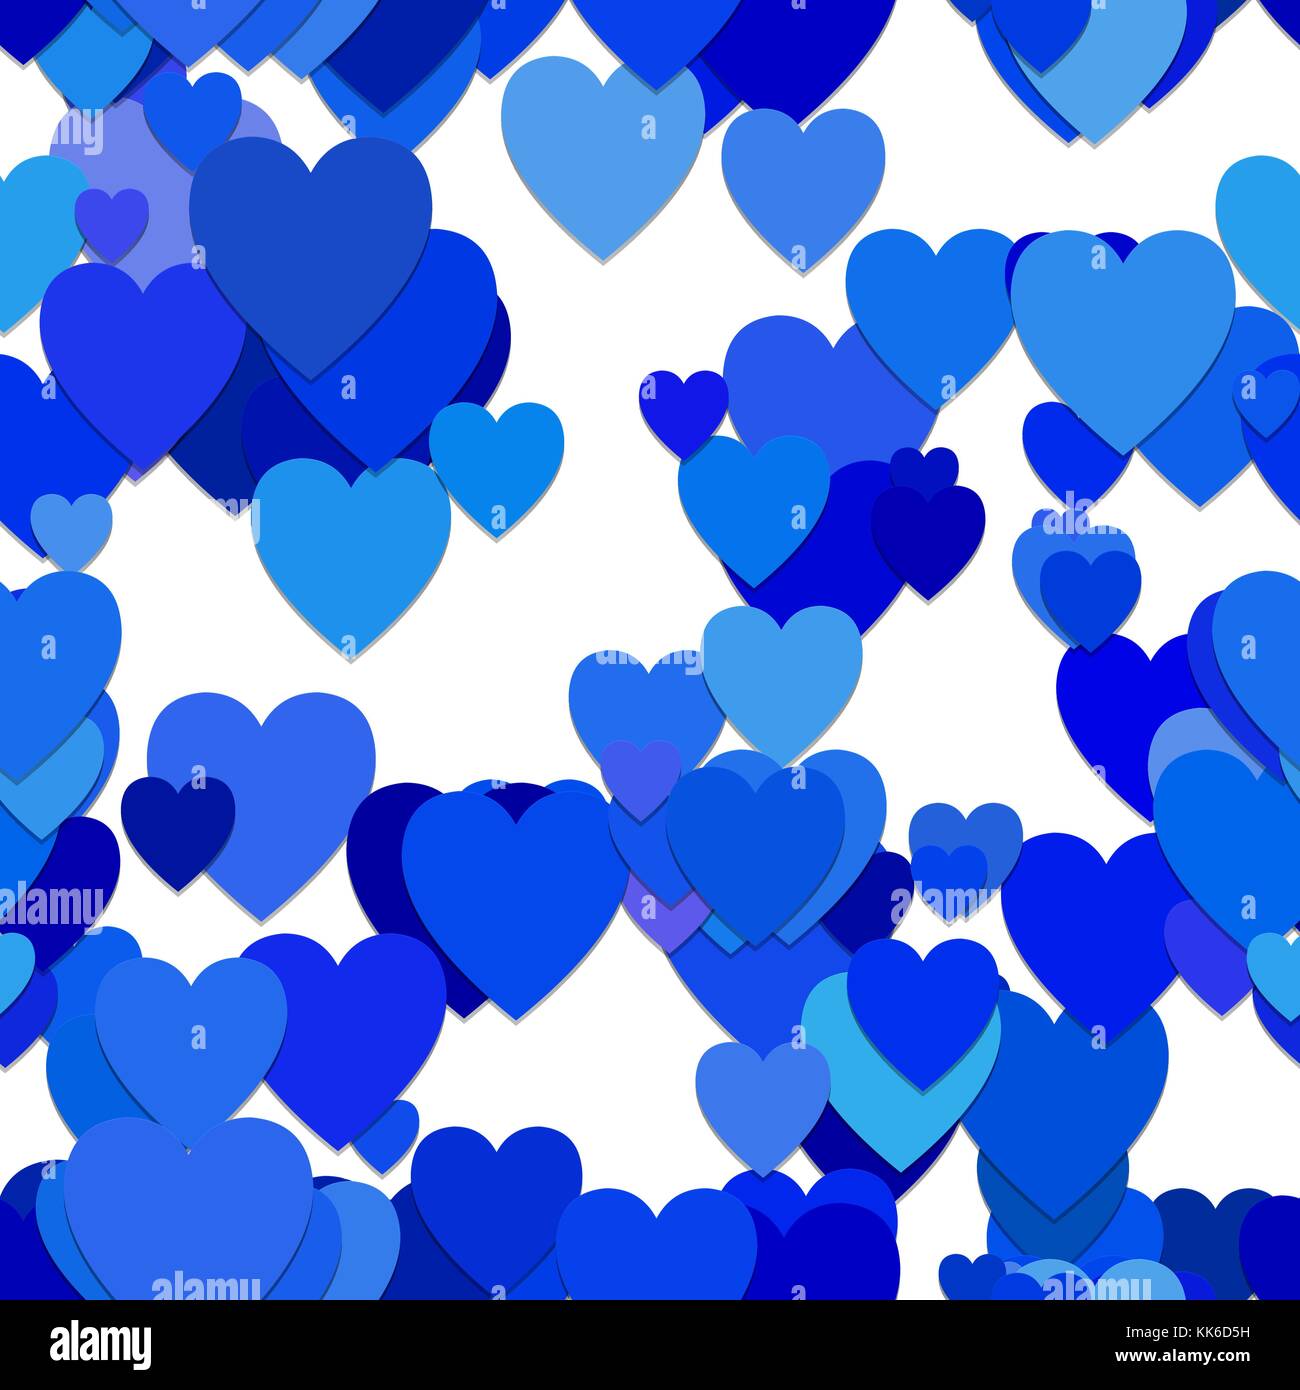 Seamless random heart pattern background - vector graphic design from hearts in blue tones Stock Vector